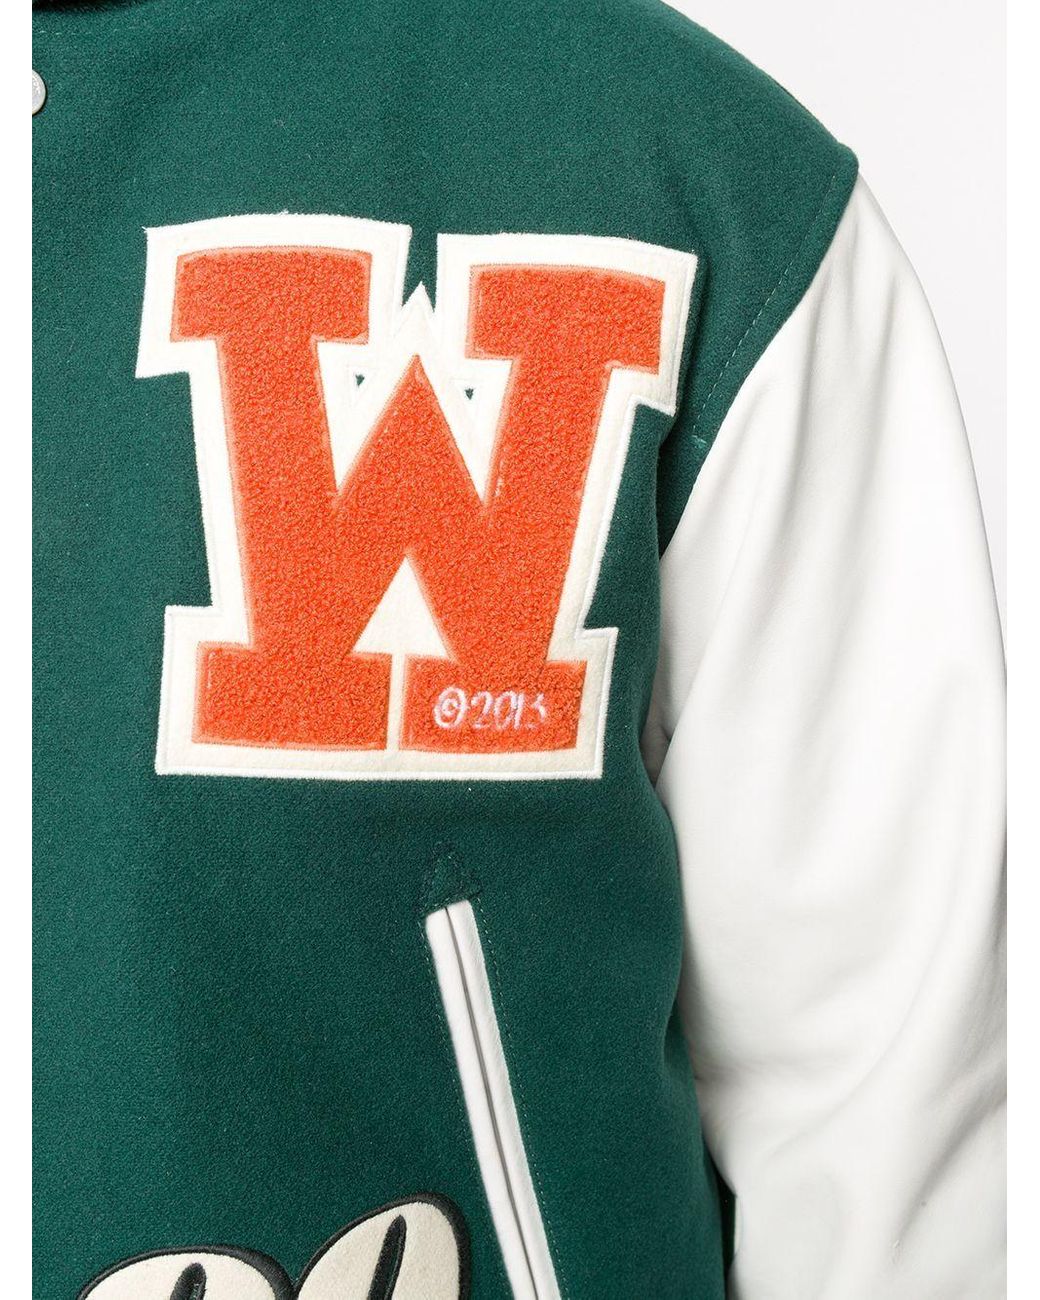 Off-White Virgil Abloh 2015 Letterman Jacket with Patches